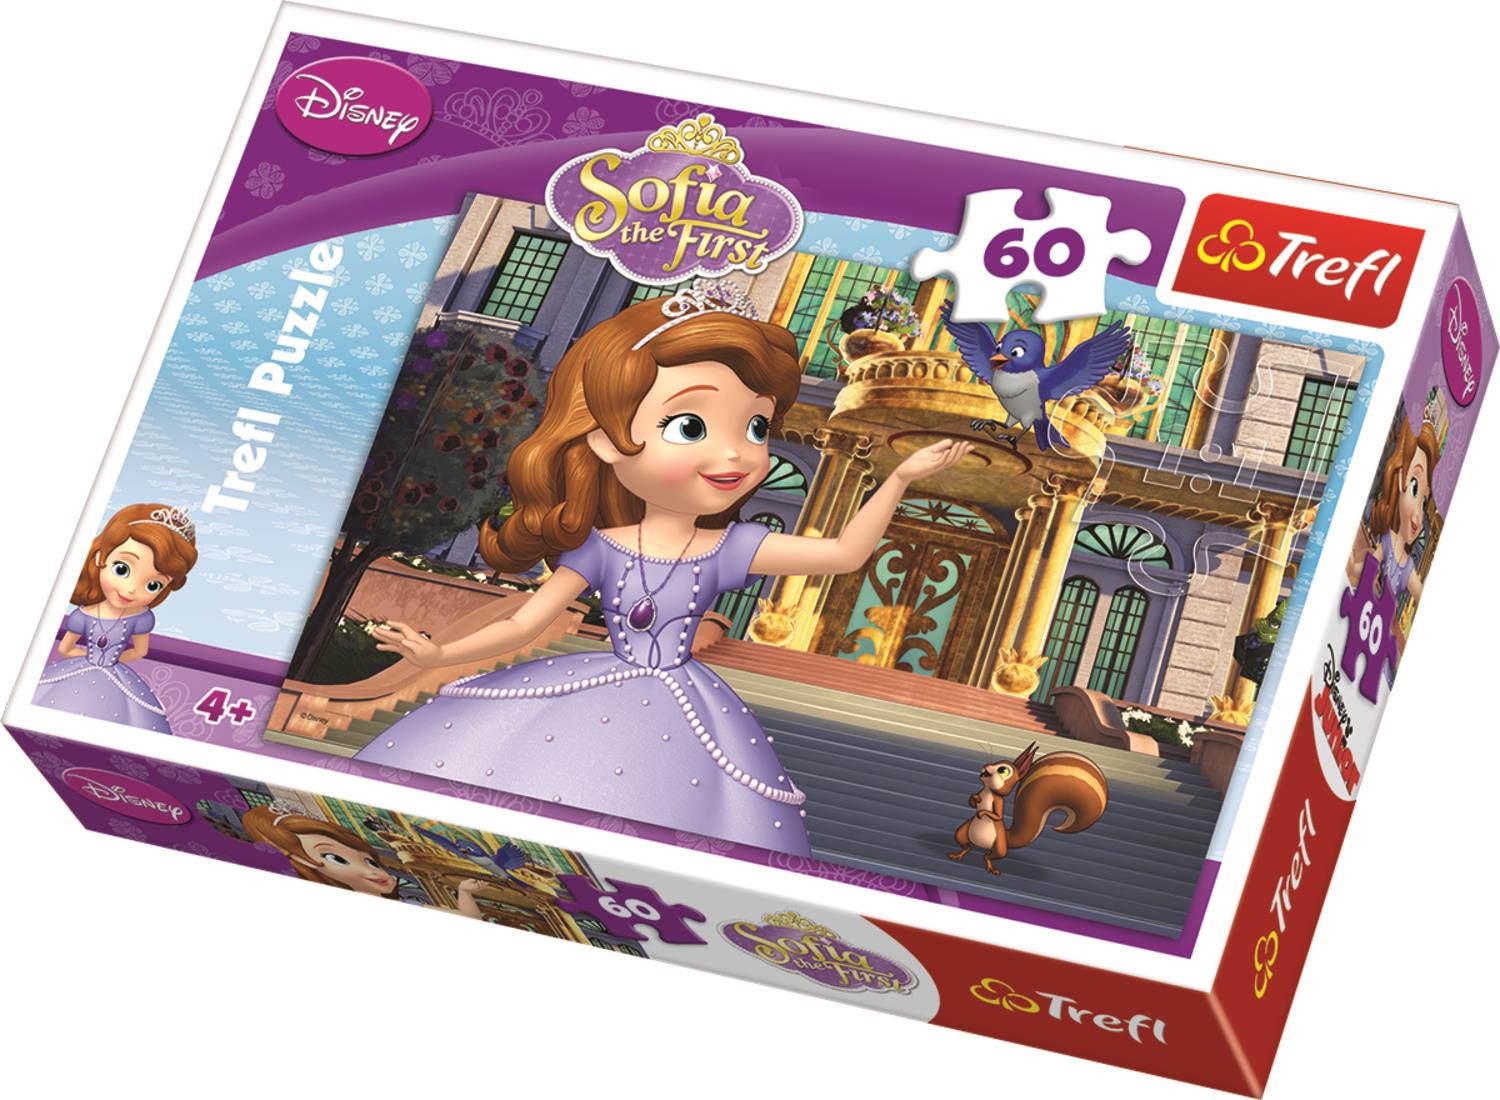 Trefl Çocuk Puzzle 17239 Sofia The First In Front Of Palace, Disney 60 Parça Puzzle